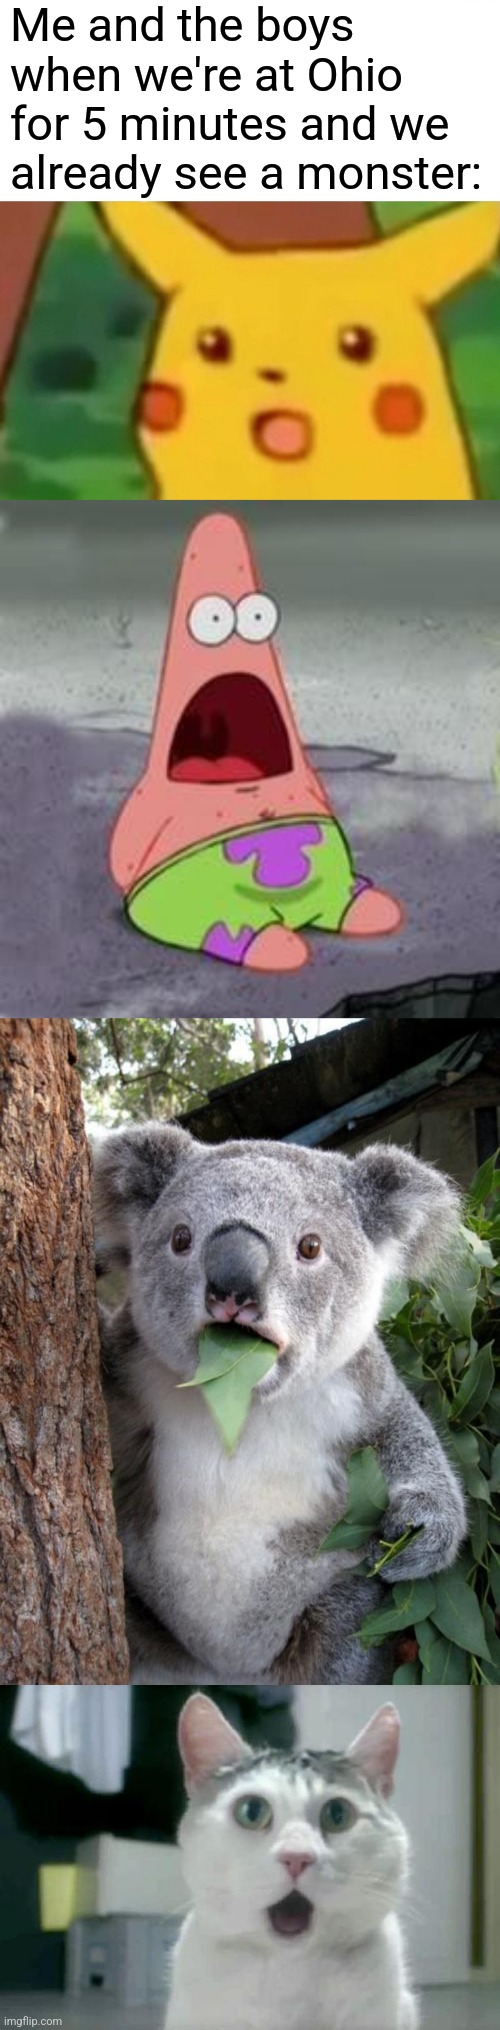 The Goofy Ahh State. | Me and the boys when we're at Ohio for 5 minutes and we already see a monster: | image tagged in memes,surprised pikachu,suprised patrick,surprised koala,omg cat | made w/ Imgflip meme maker